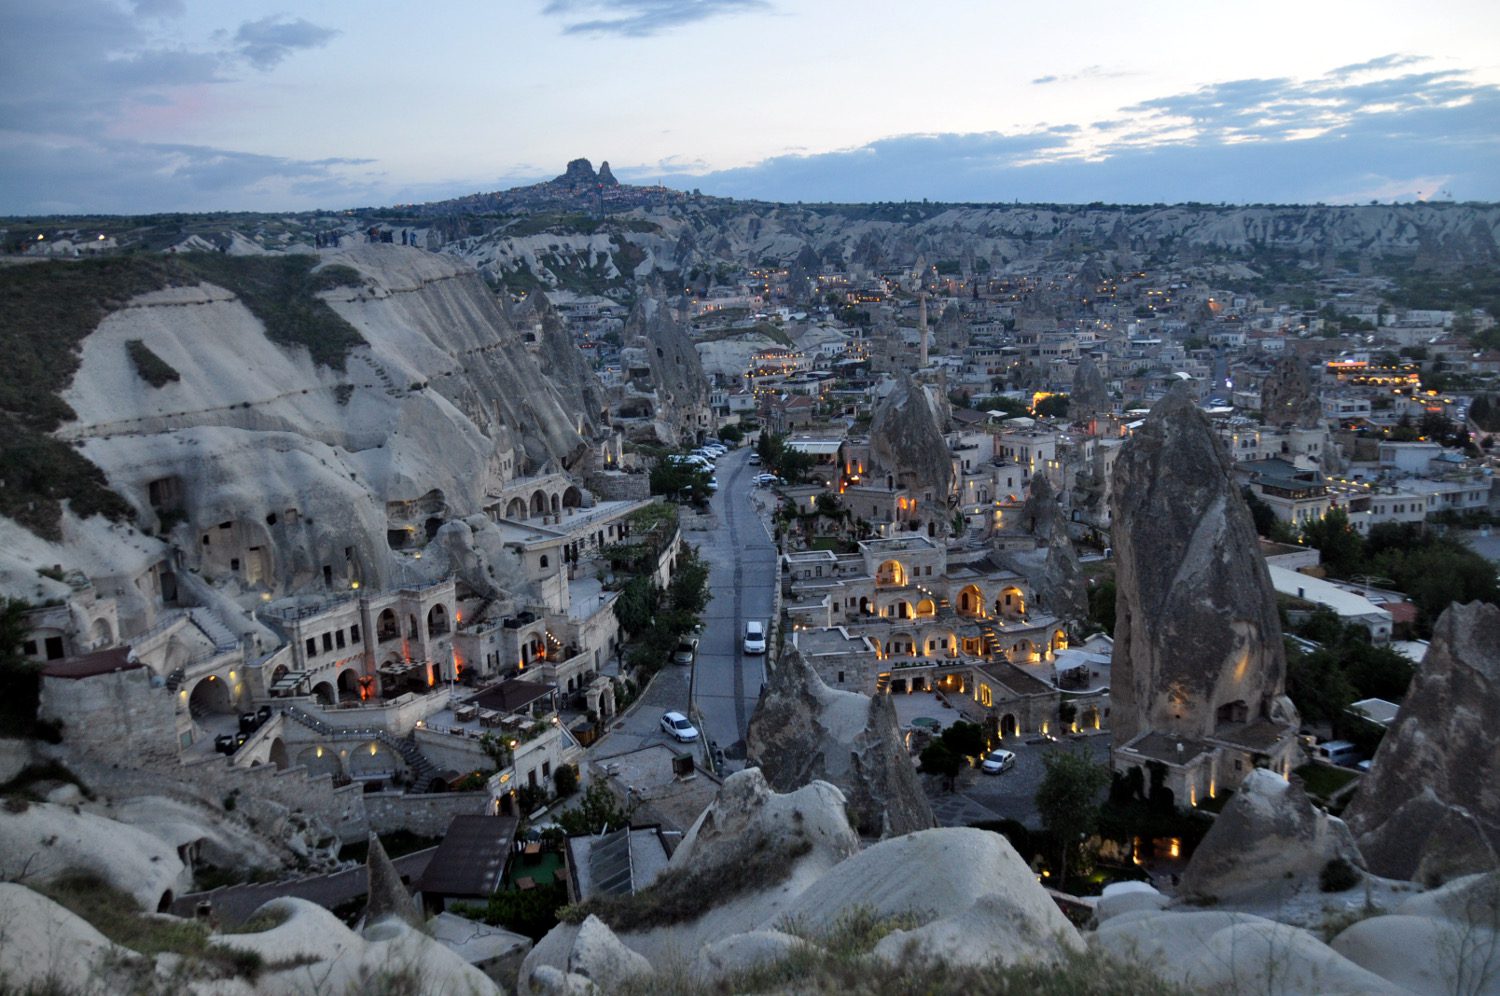 Göreme is something out of a fairy tale!